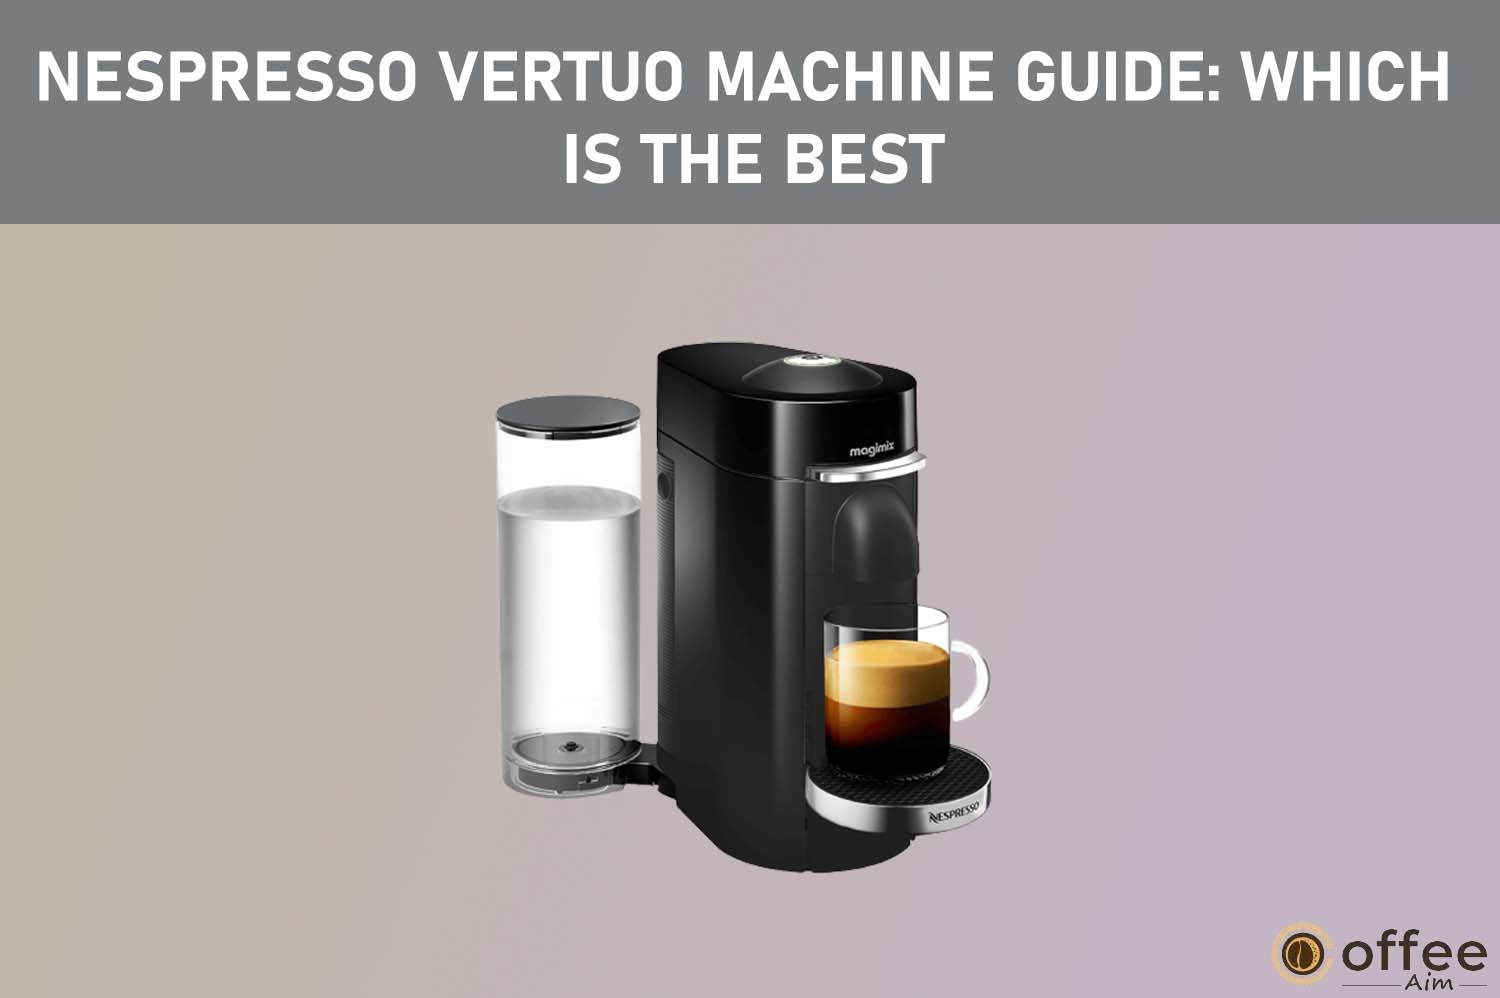 Featured image for the article "Nespresso Vertuo Machine Guide: Which is the Best?"